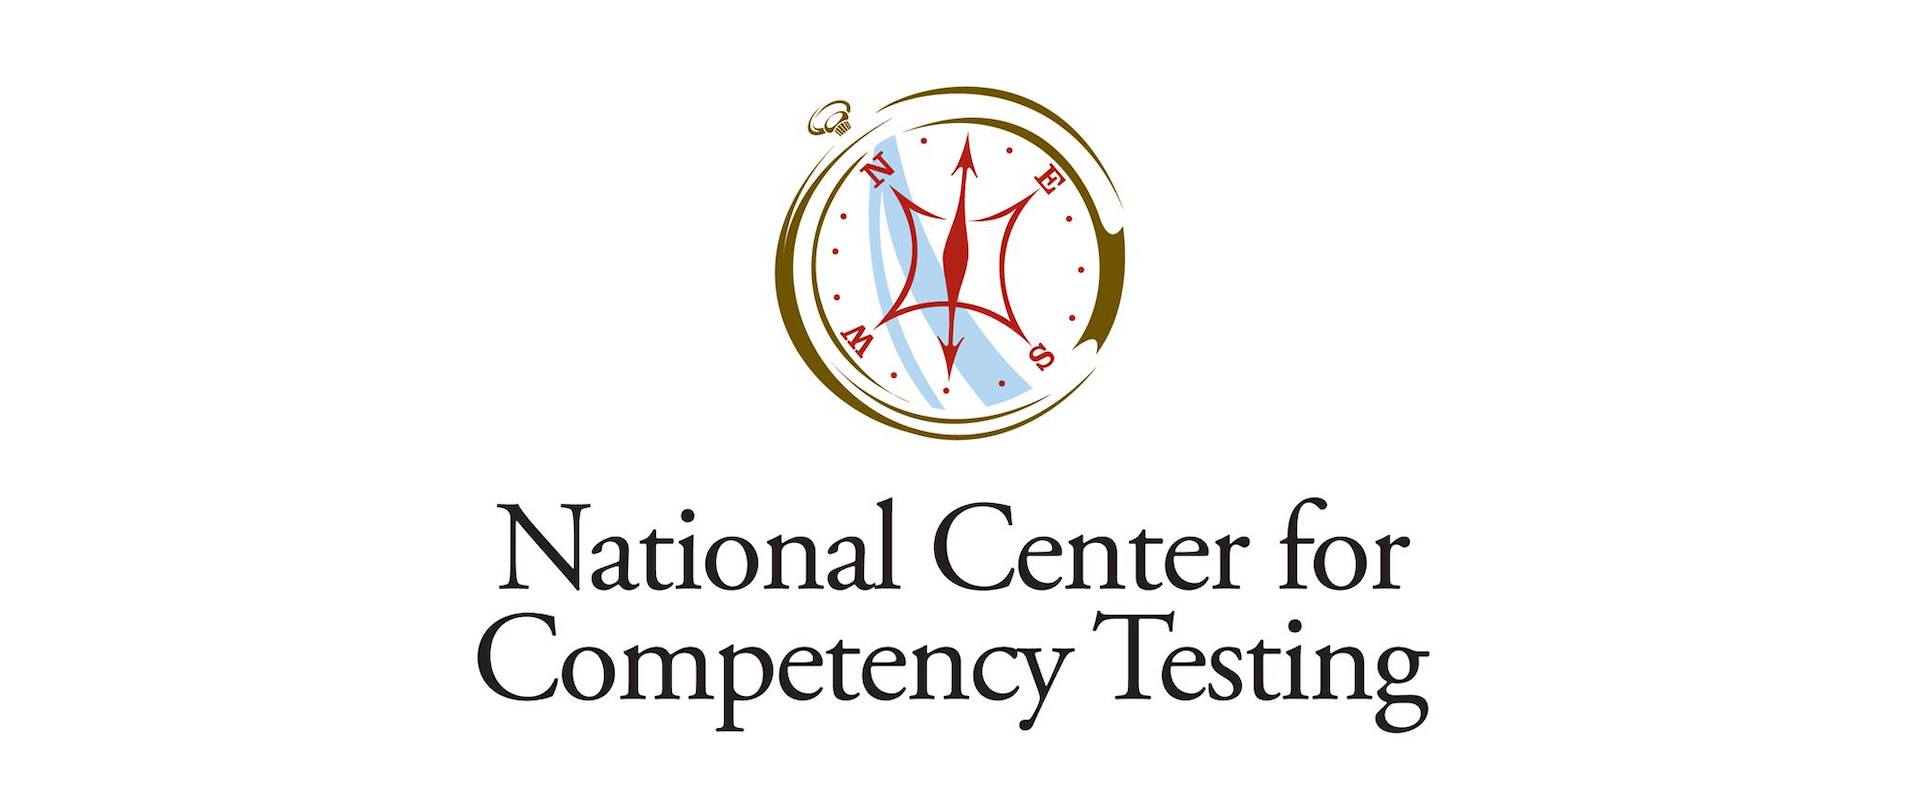 National Center for Competency Testing (NCCT)